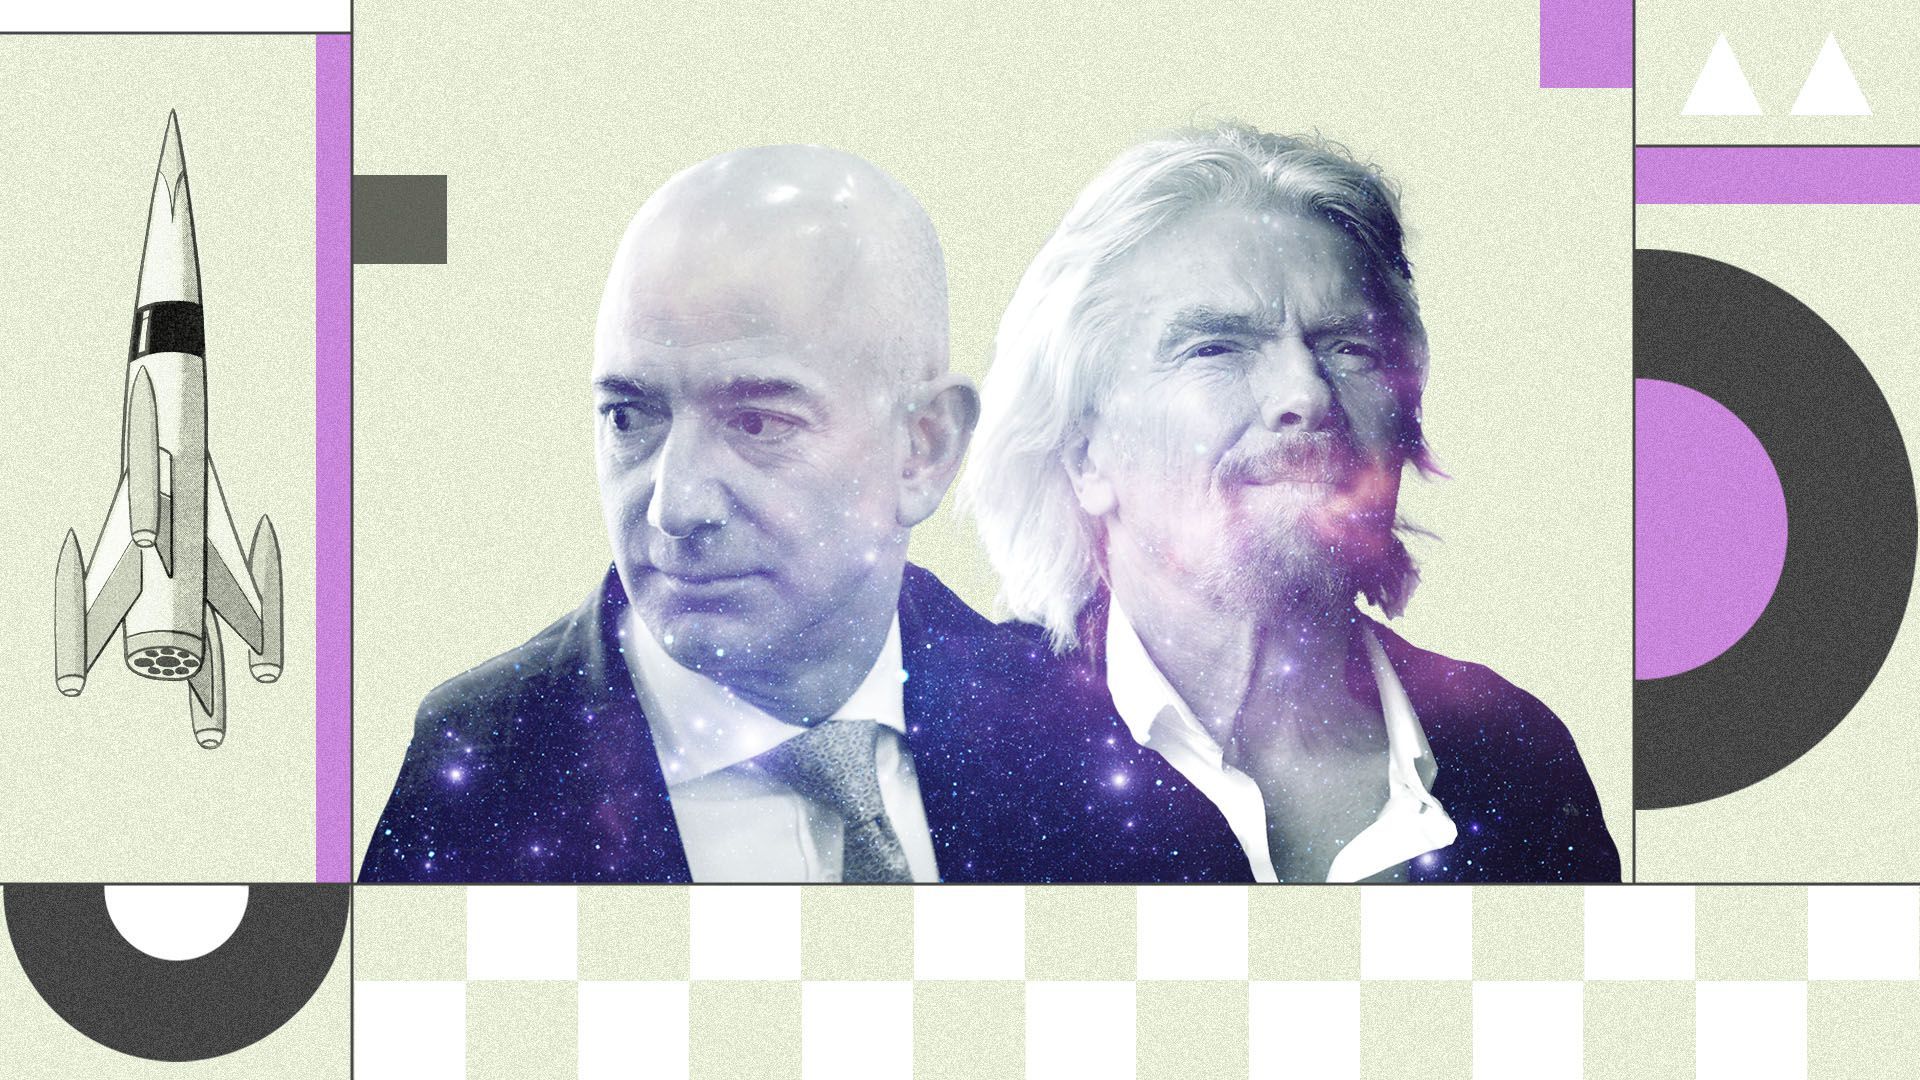 Photo illustration of Jeff Bezos and Richard Branson surrounded by shapes and a rocket